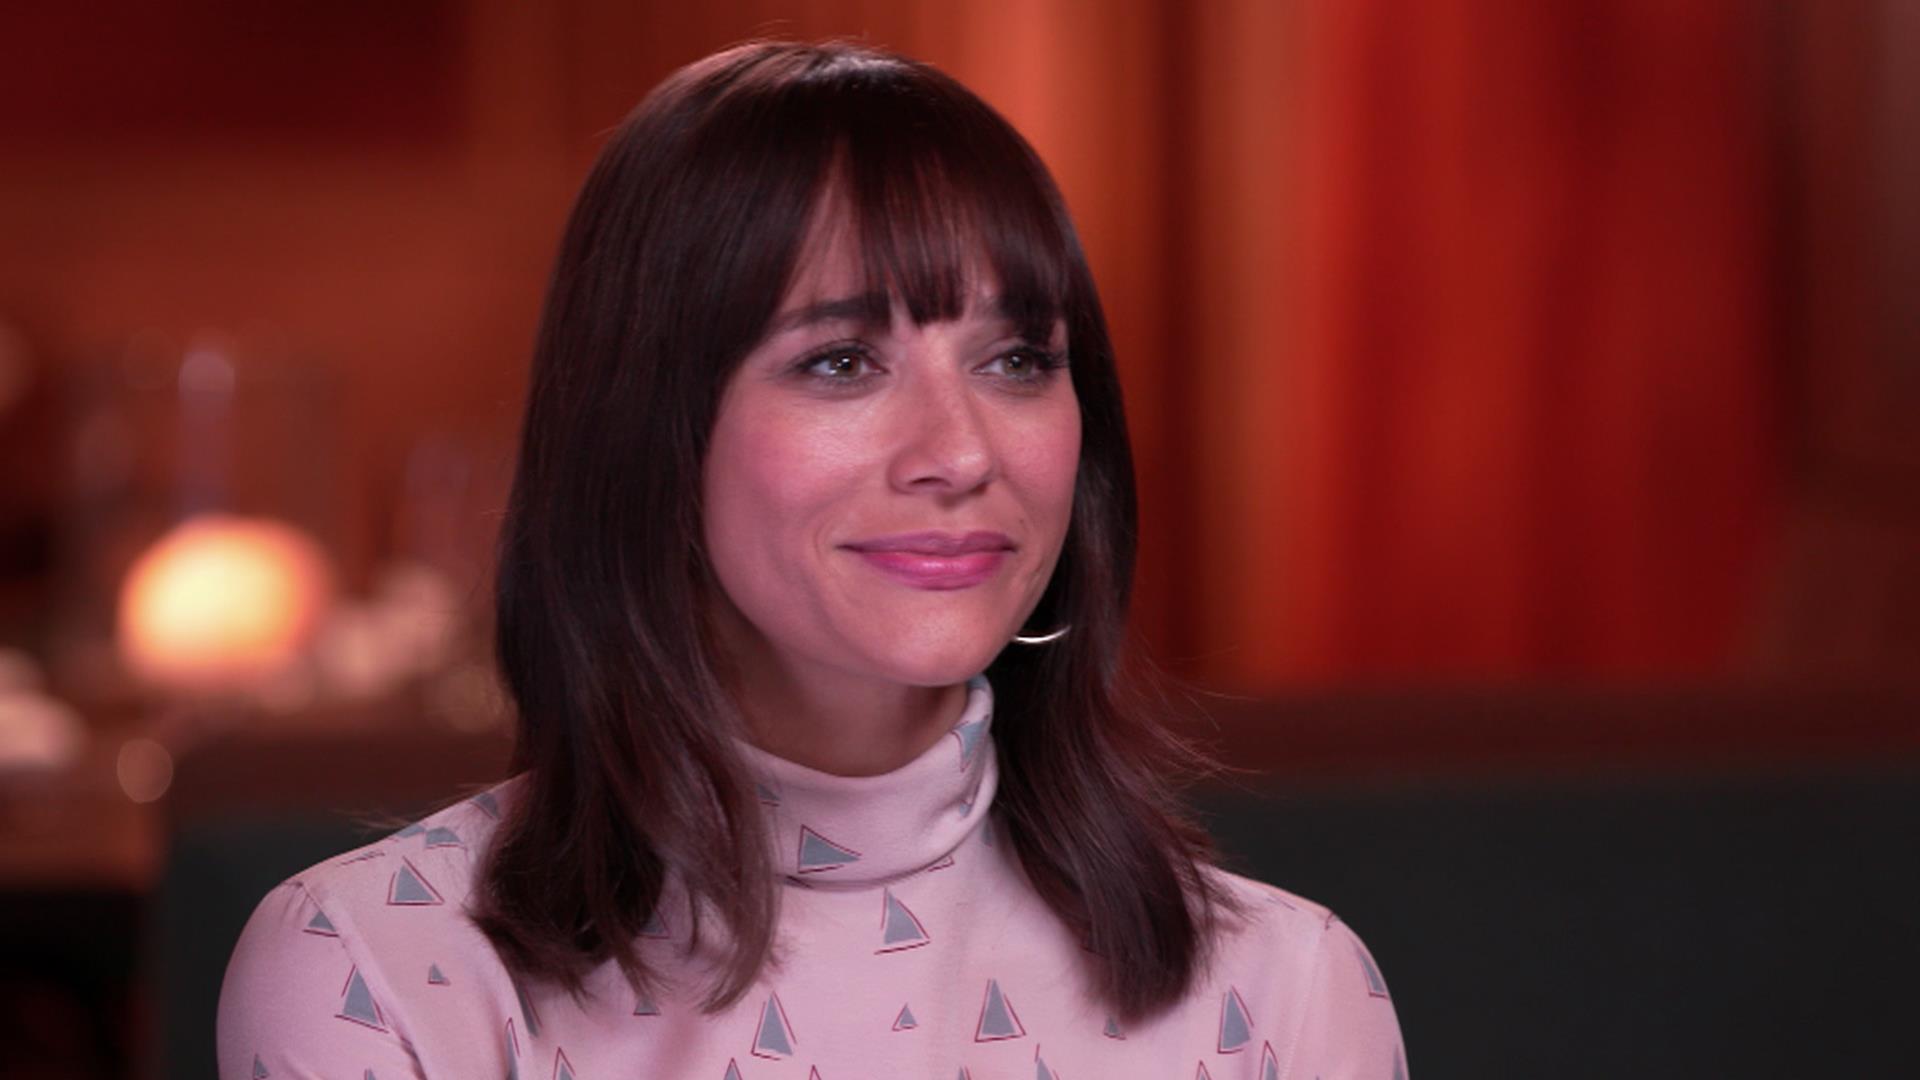 Rashida Jones: Hollywood's obsessed with looks and youth, but 'I have more to give'